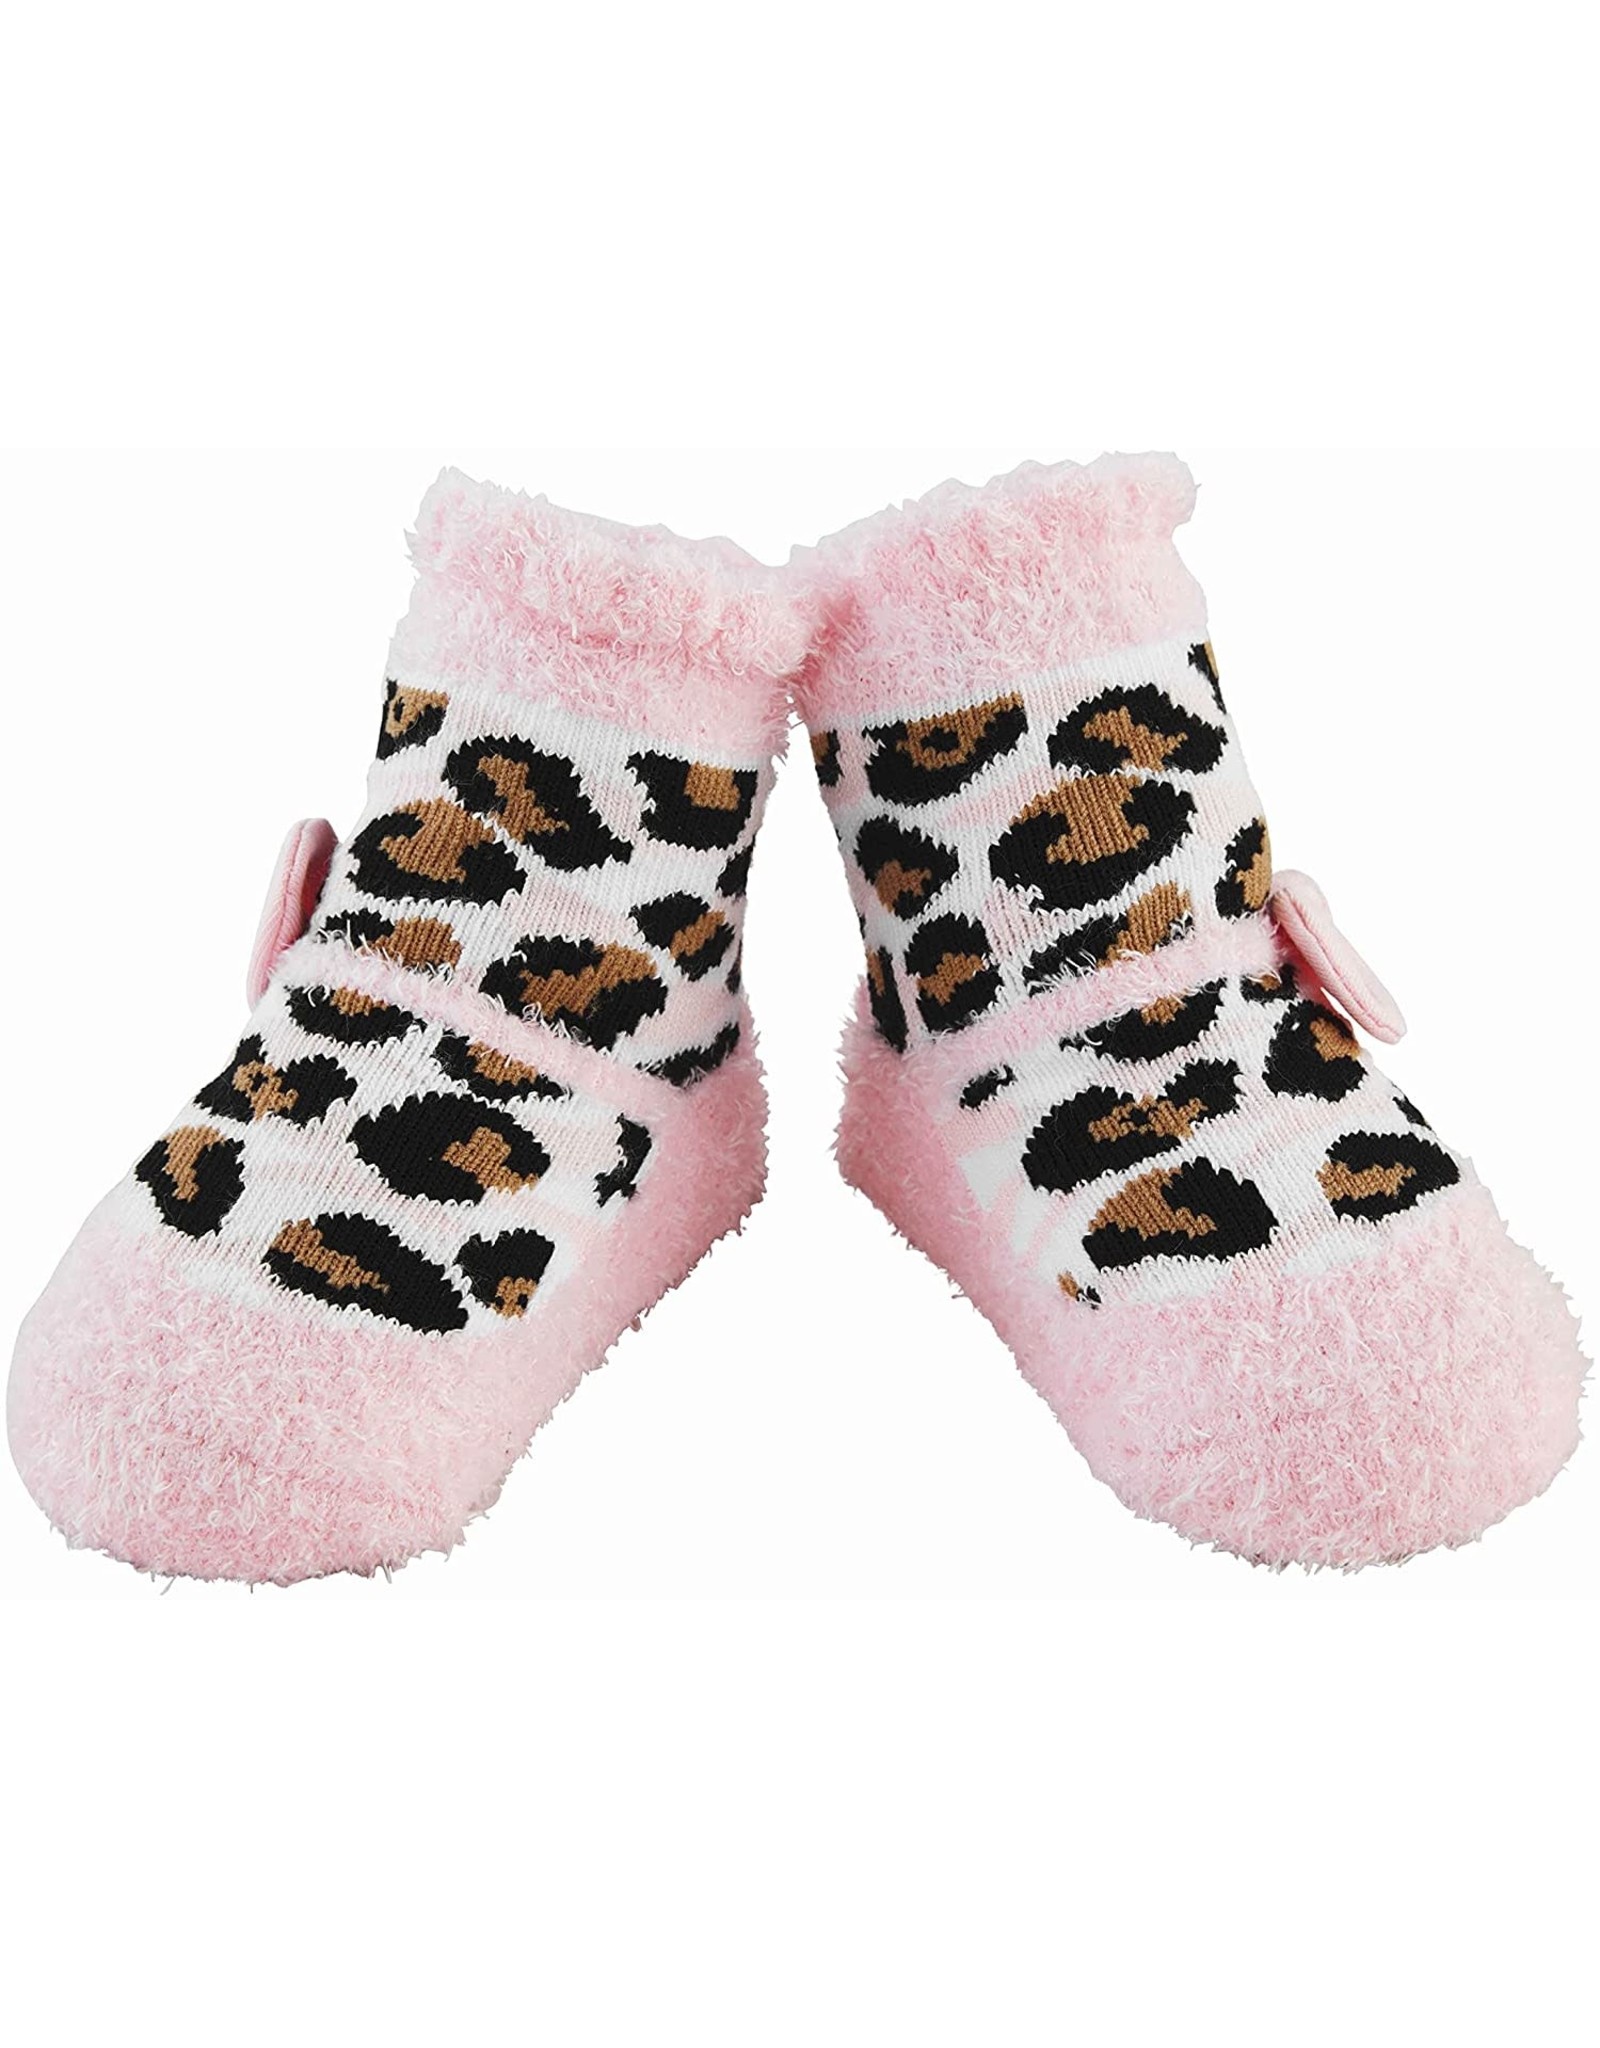 Mud Pie Pink and Leopard Baby Socks 0-12 Months